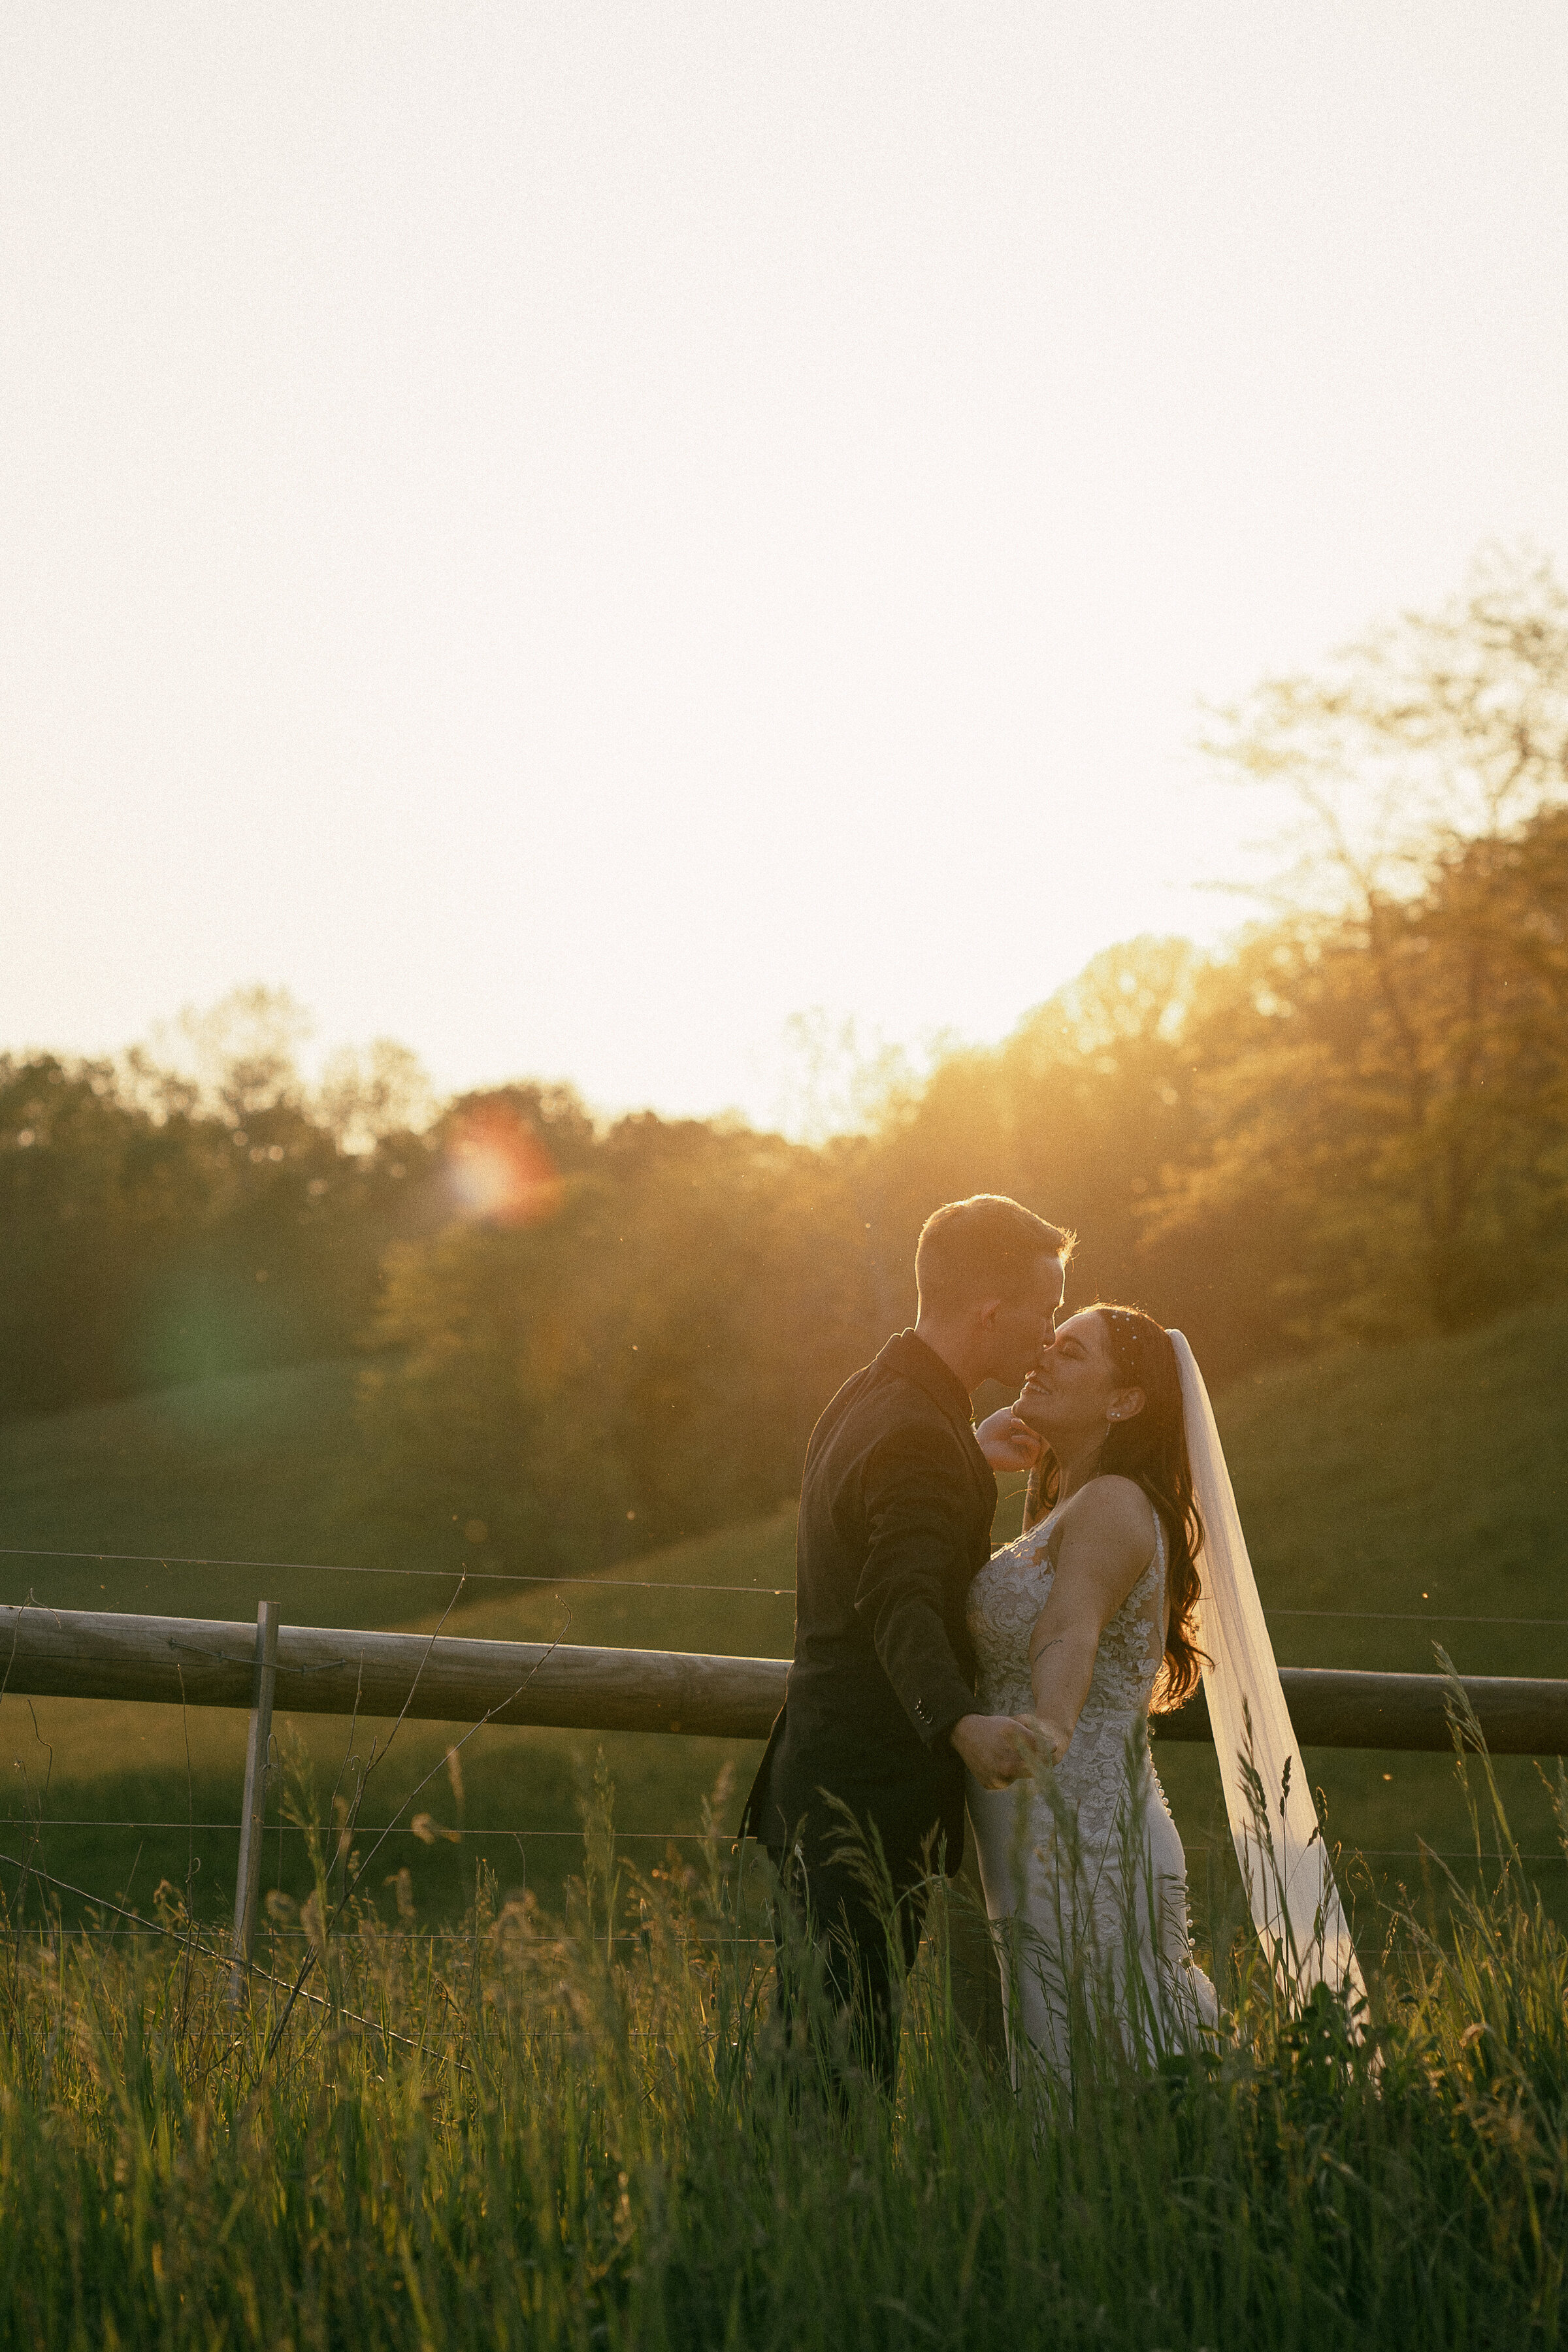 Couple kissing in a field at sunset, wedding photoshoot.